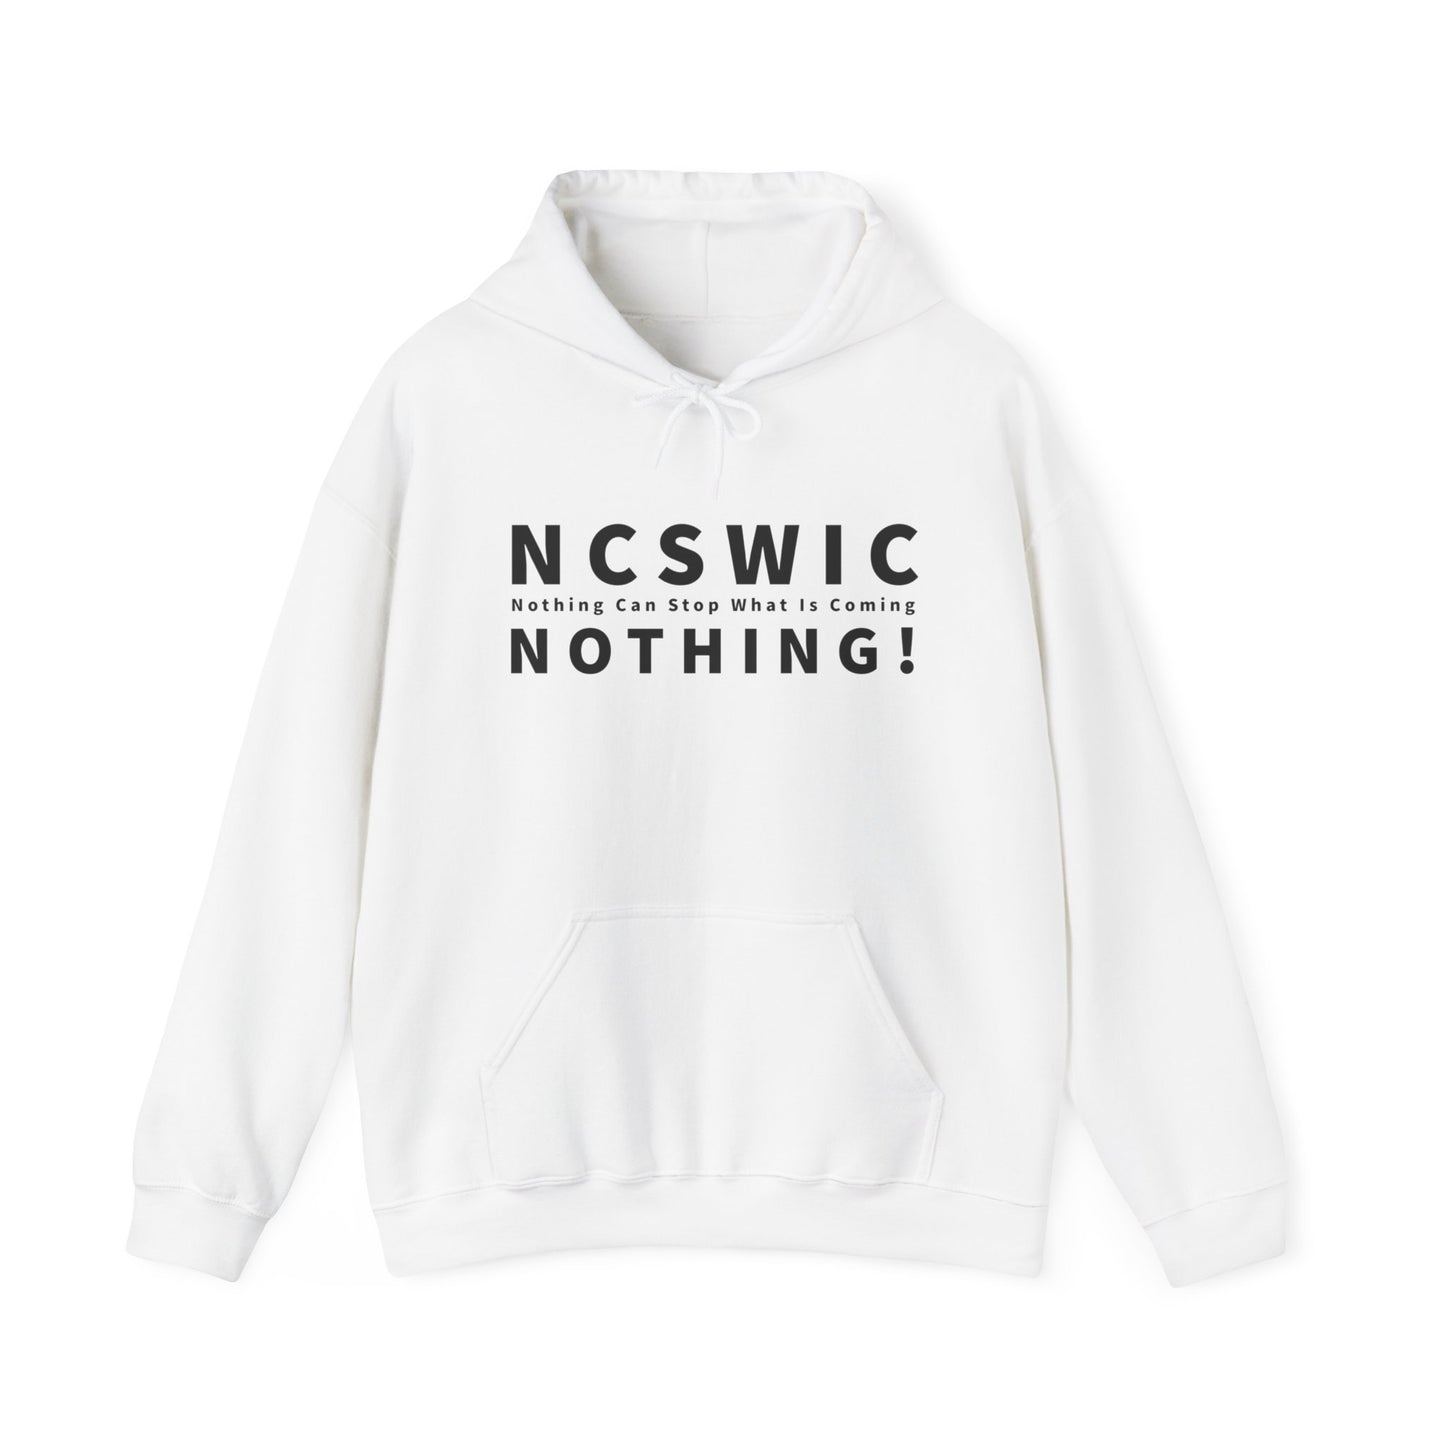 NCSWIC Hooded Sweatshirt For Conservative Hoodie For Patriot Message